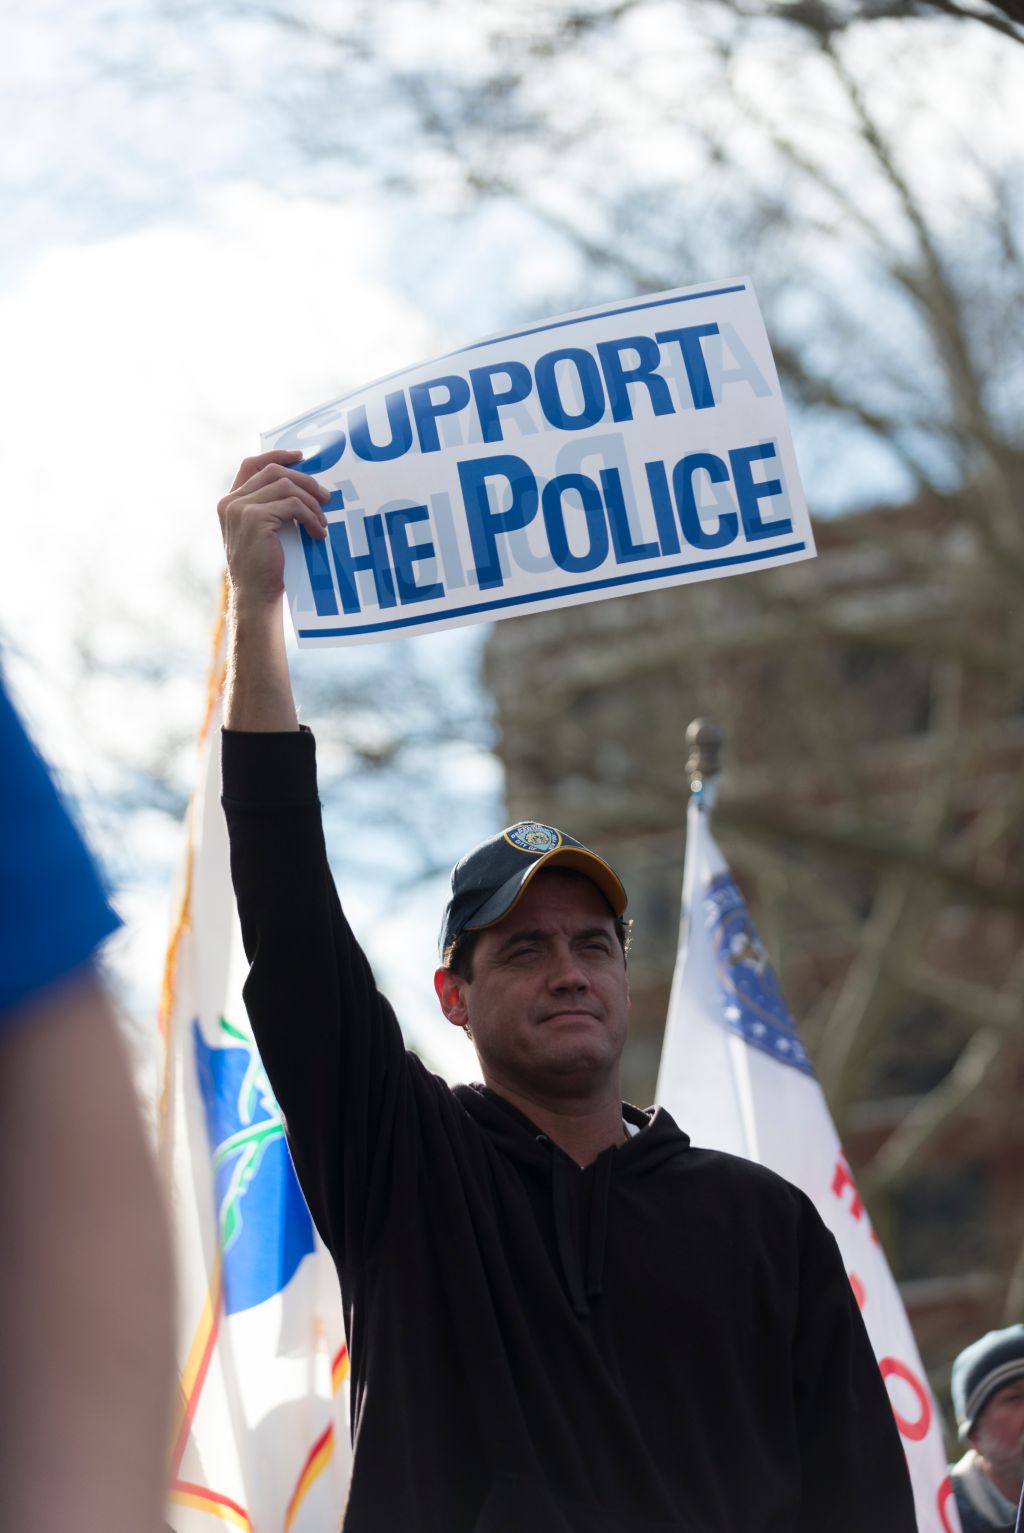 pro-police rally